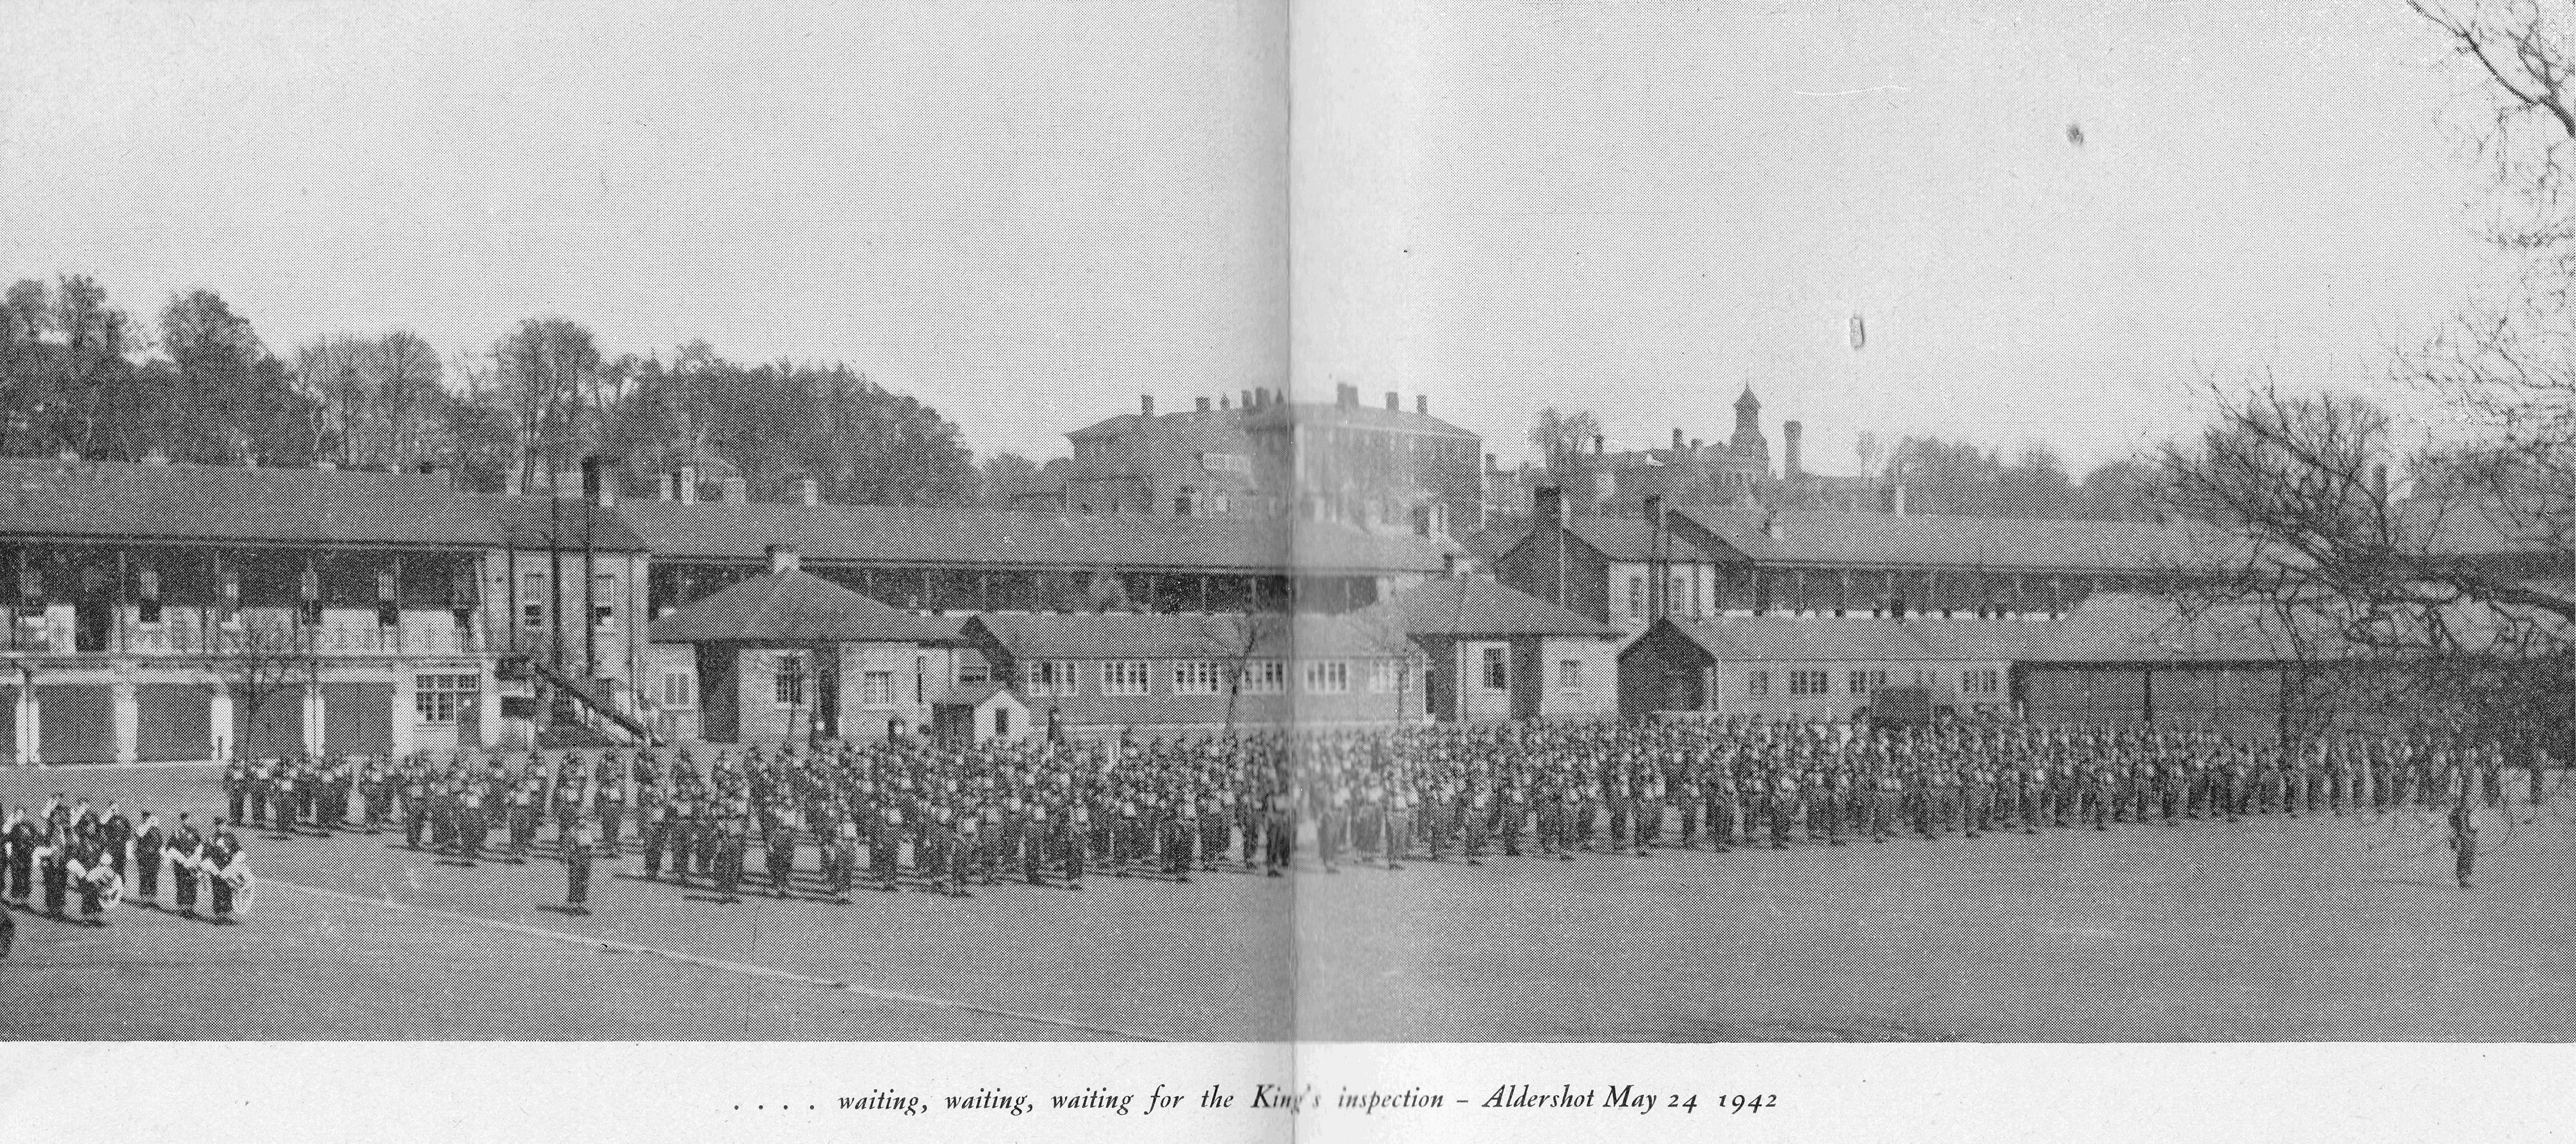 17th Field Regiment waiting for the inspection by the King and Queen on 1942 05 24